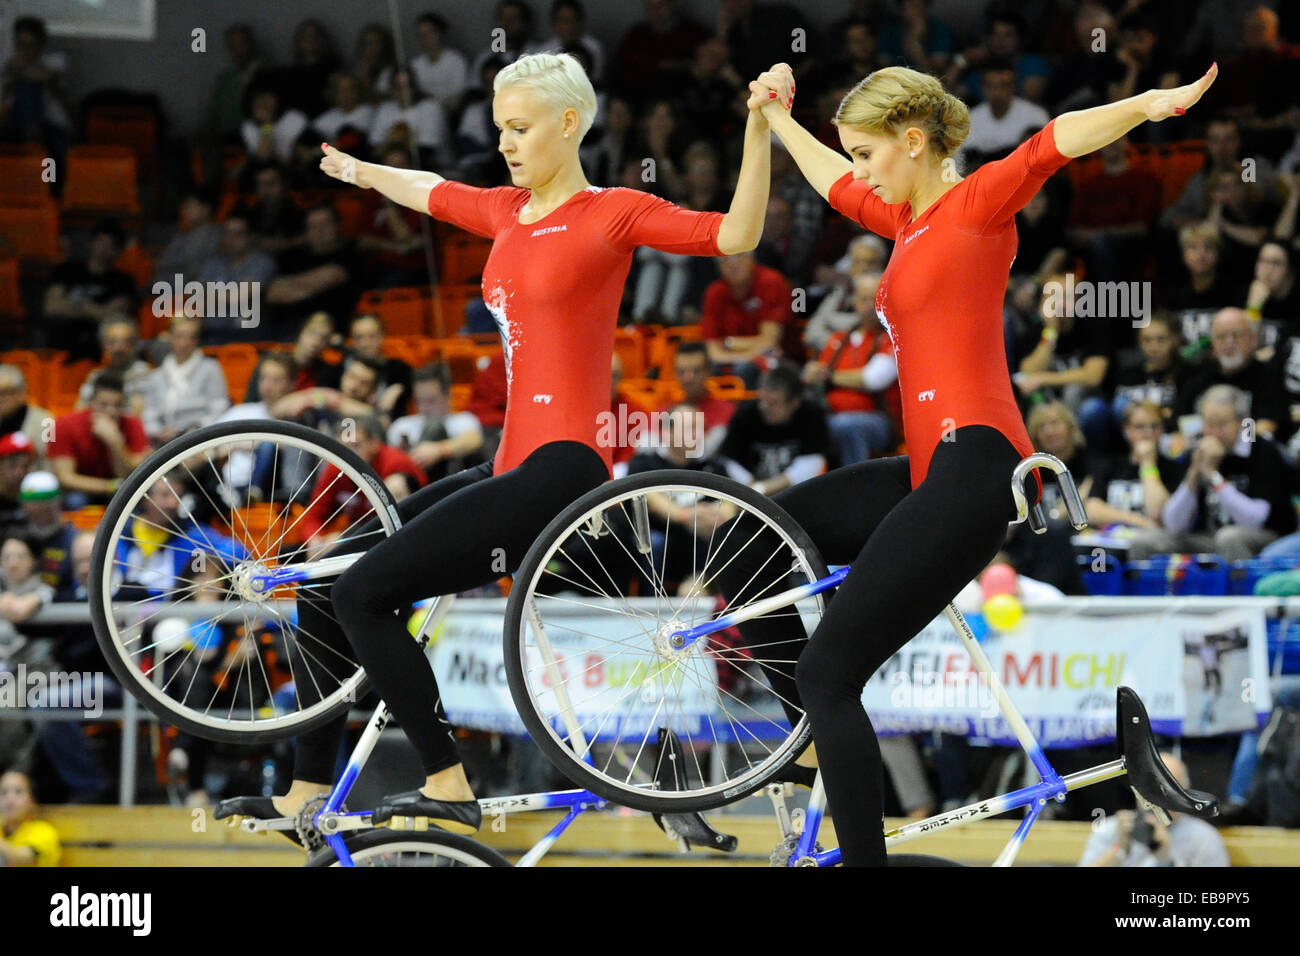 Nadine Morth (left) and Katharina Kuhne of Austria pictured after the Artistic Cycling Pairs Women final at the Indoor Cycling Stock Photo